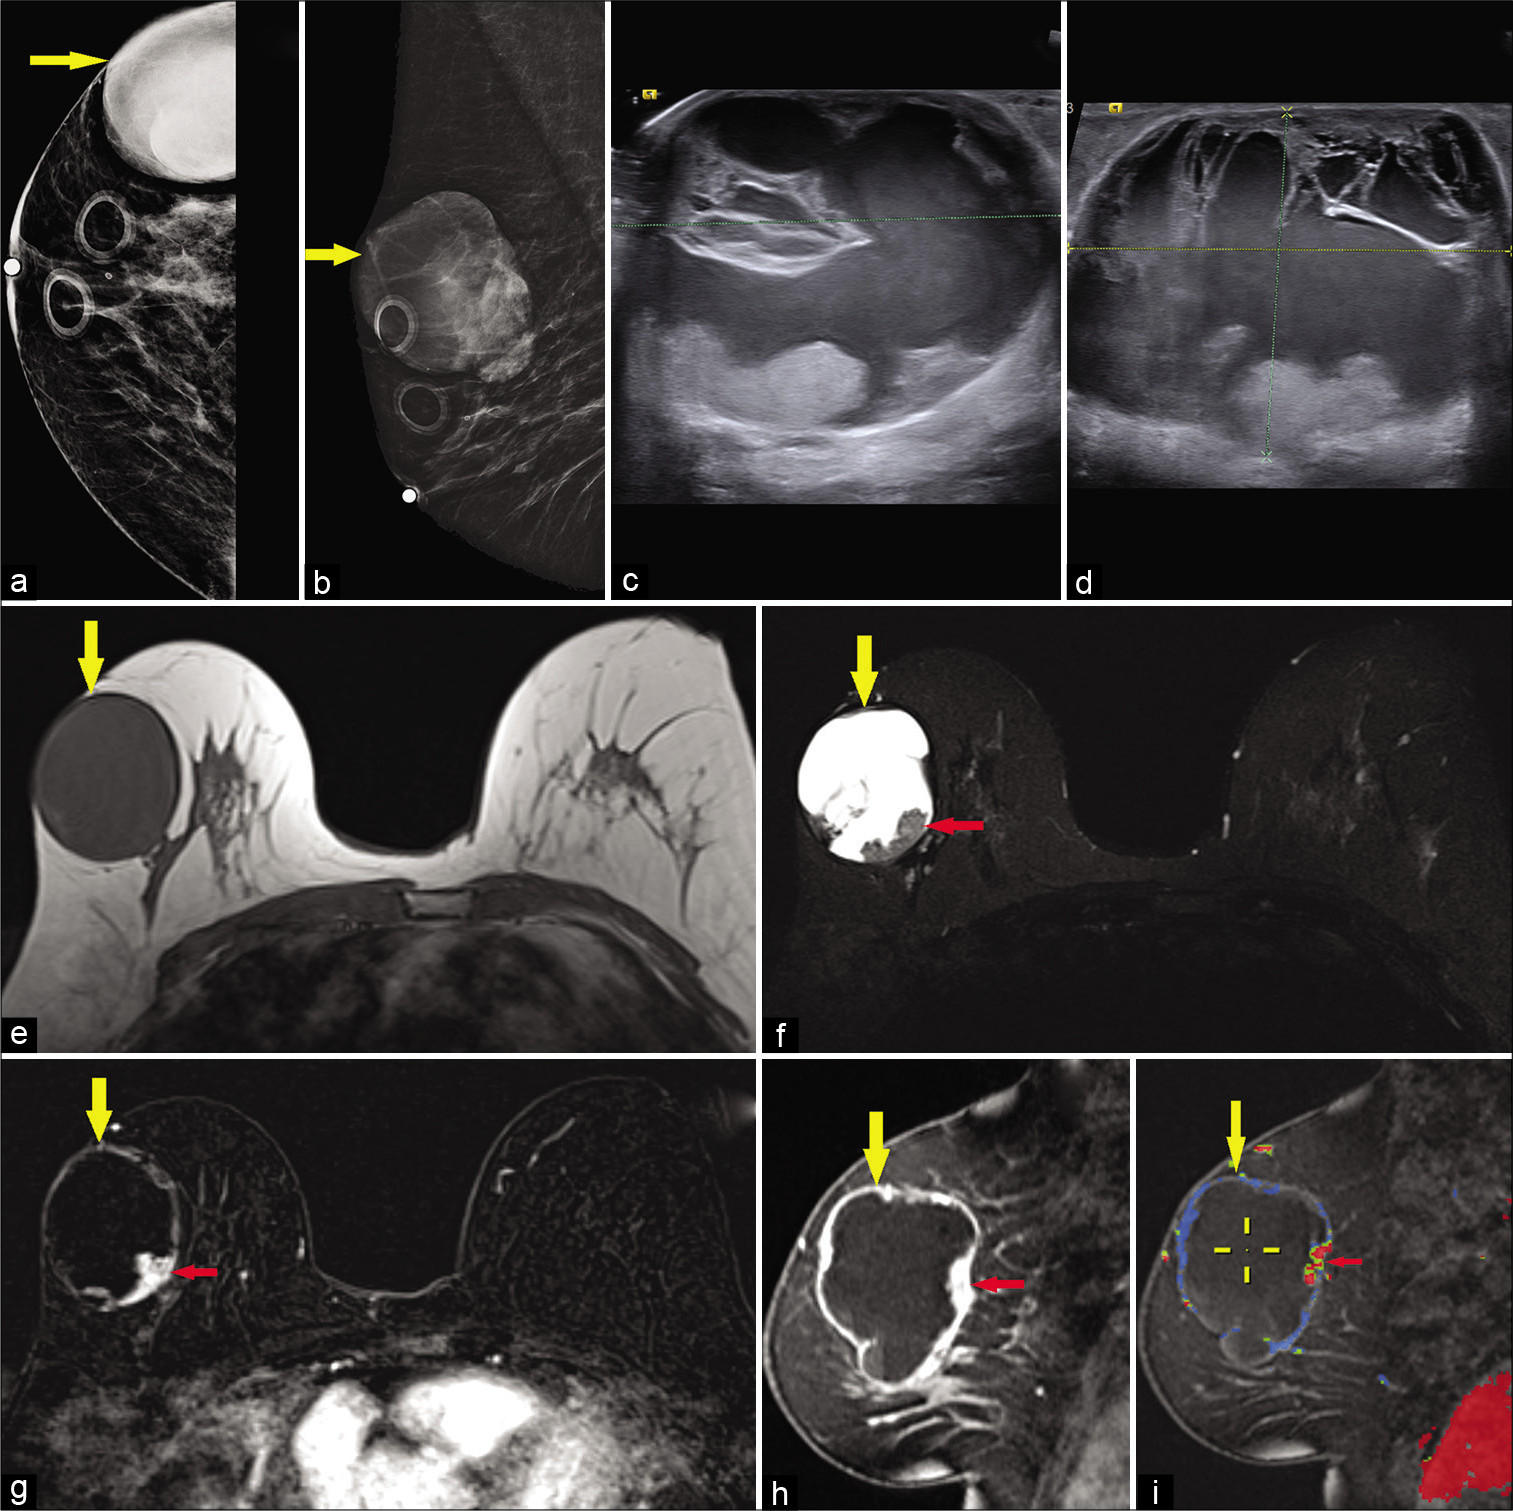 A 65-year-old female presented for a palpable left breast lump. Diagnostic mammogram CC (a) and MLO (b) views demonstrated a large high-density mass in the upper outer right breast (yellow arrow). Targeted ultrasound – transverse (c) and sagittal (d) images of the left breast demonstrated a mixed cystic and solid mass measuring approximately 4.4 × 5.7 × 5.2 cm (AP × TR × CC) at 10’o position, 7 cm from the nipple. Magnetic resonance imaging (MRI) breasts demonstrated T1 hypointense (e), T2 hyperintense (f) large cystic and solid round mass in the upper outer right breast (yellow arrow) with mural nodularity (red arrow) and fluid-fluid levels. Dynamic contrast-enhanced MRI axial (g) and sagittal images (h) demonstrated peripheral and nodular mural enhancement (red arrow) in the mass (yellow arrow), with washout kinetics in the mural nodule (i), ultrasound-guided core biopsy of the mass showed papillary carcinoma.